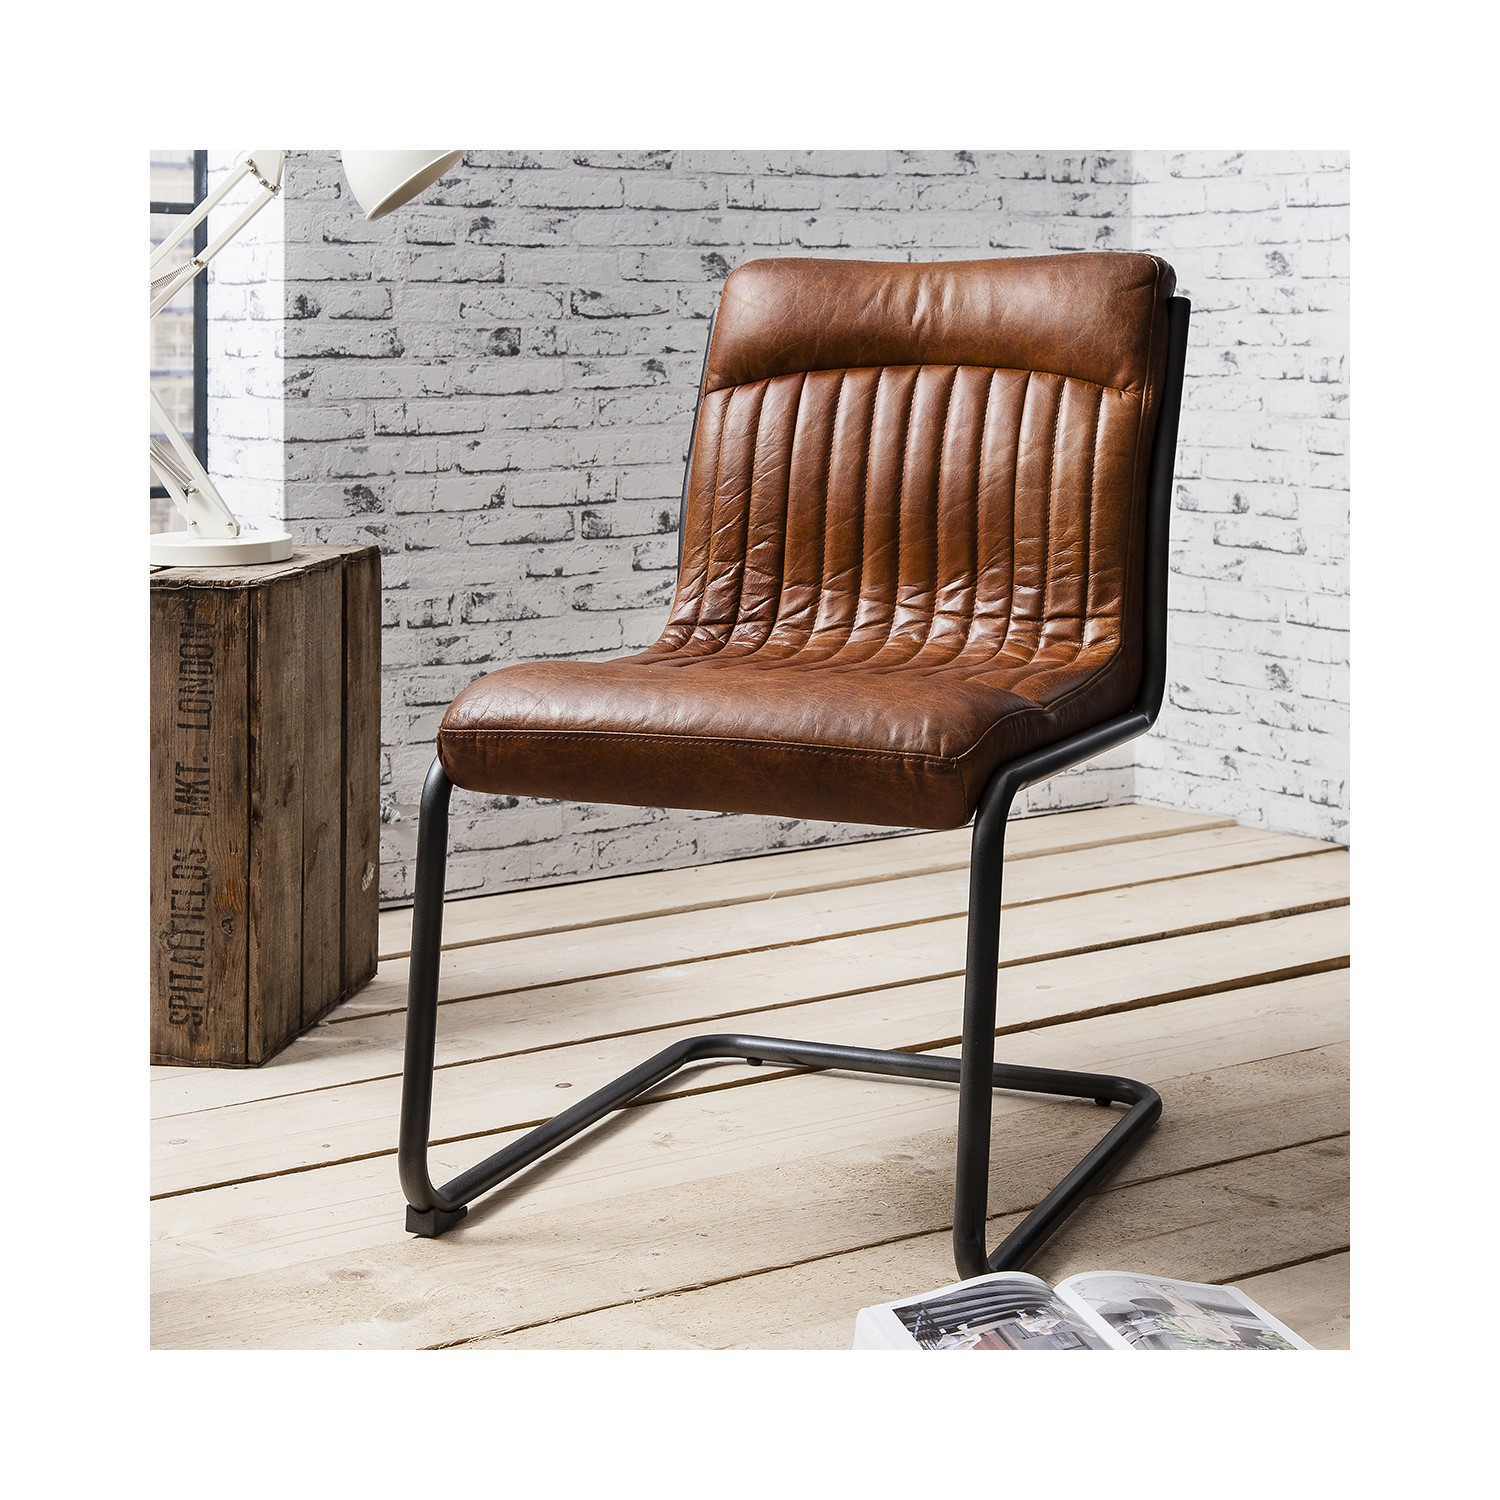 Genuine Leather Upholstered Dining, Leather Upholstered Dining Chairs Uk